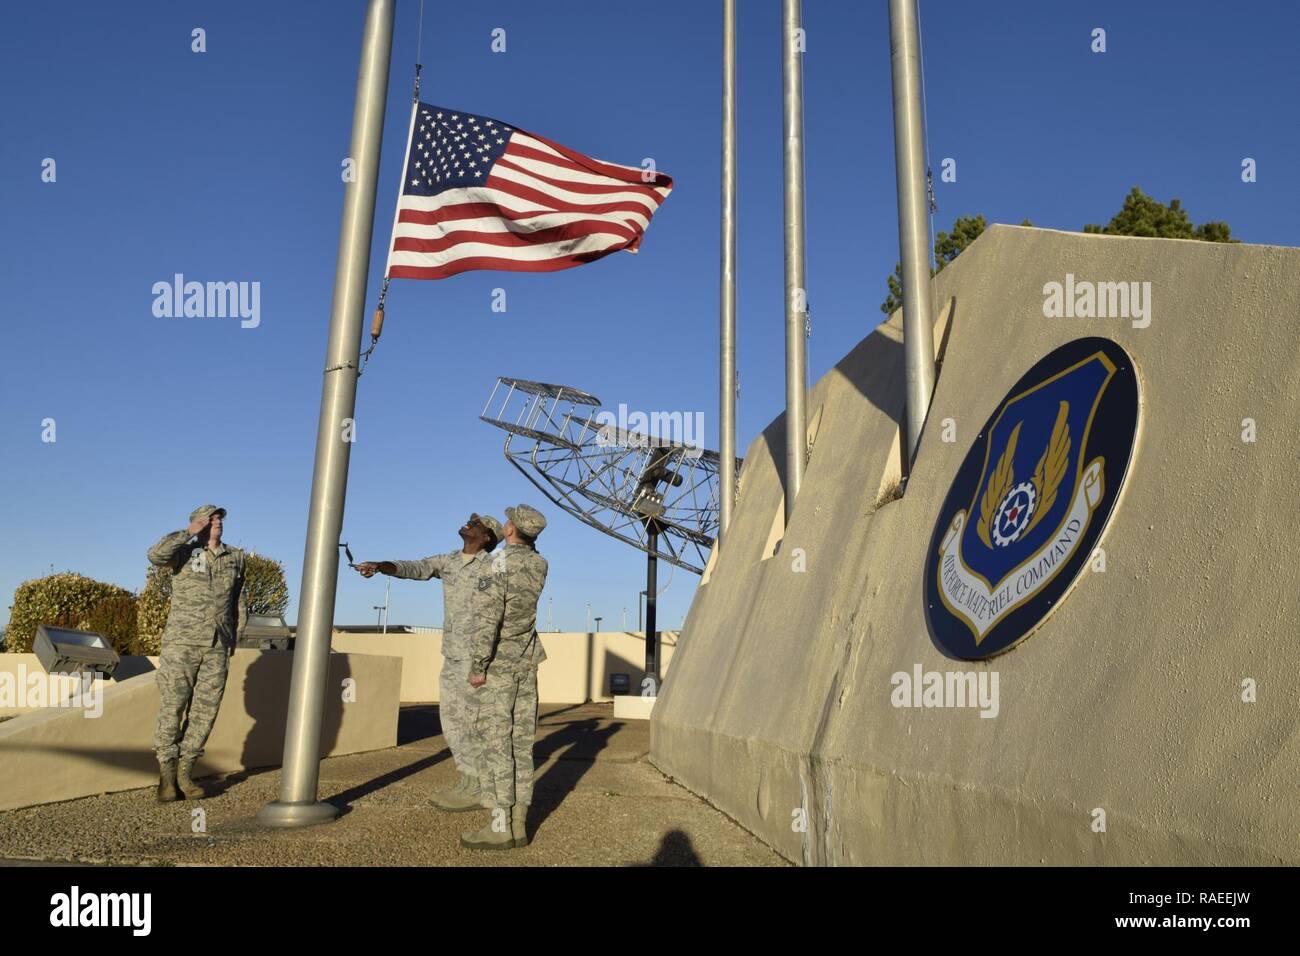 Military members of the Oklahoma City Air Logistics Complex lower the American flag from the base flag pole during an official retreat ceremony Jan. 24, 2017, Tinker Air Force Base, Oklahoma. OC-ALC  conducted the retreat ceremony as part of the official Tinker AFB 75th Anniversary events. Tinker hosts the Air Force Sustainment Center and falls under the Air Force Materiel Command. The AFMC badge is displayed on the wall. Stock Photo